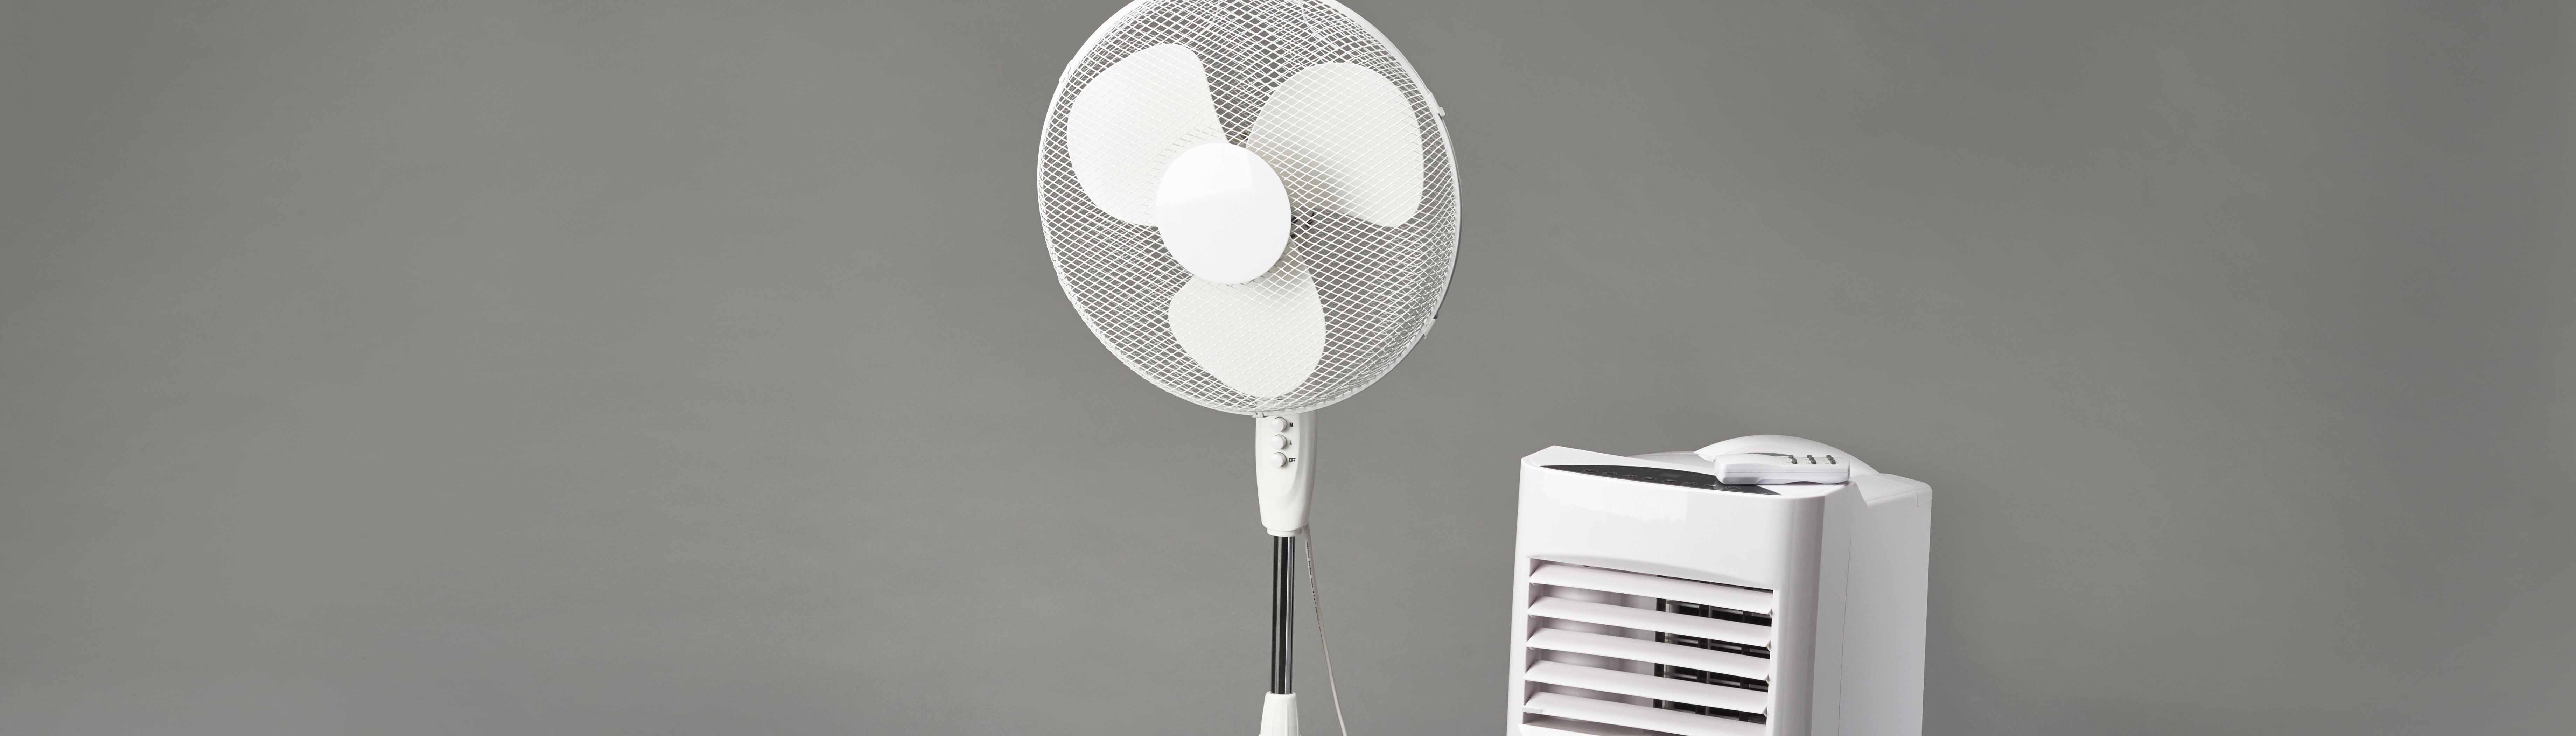 Fans and indoor climate 